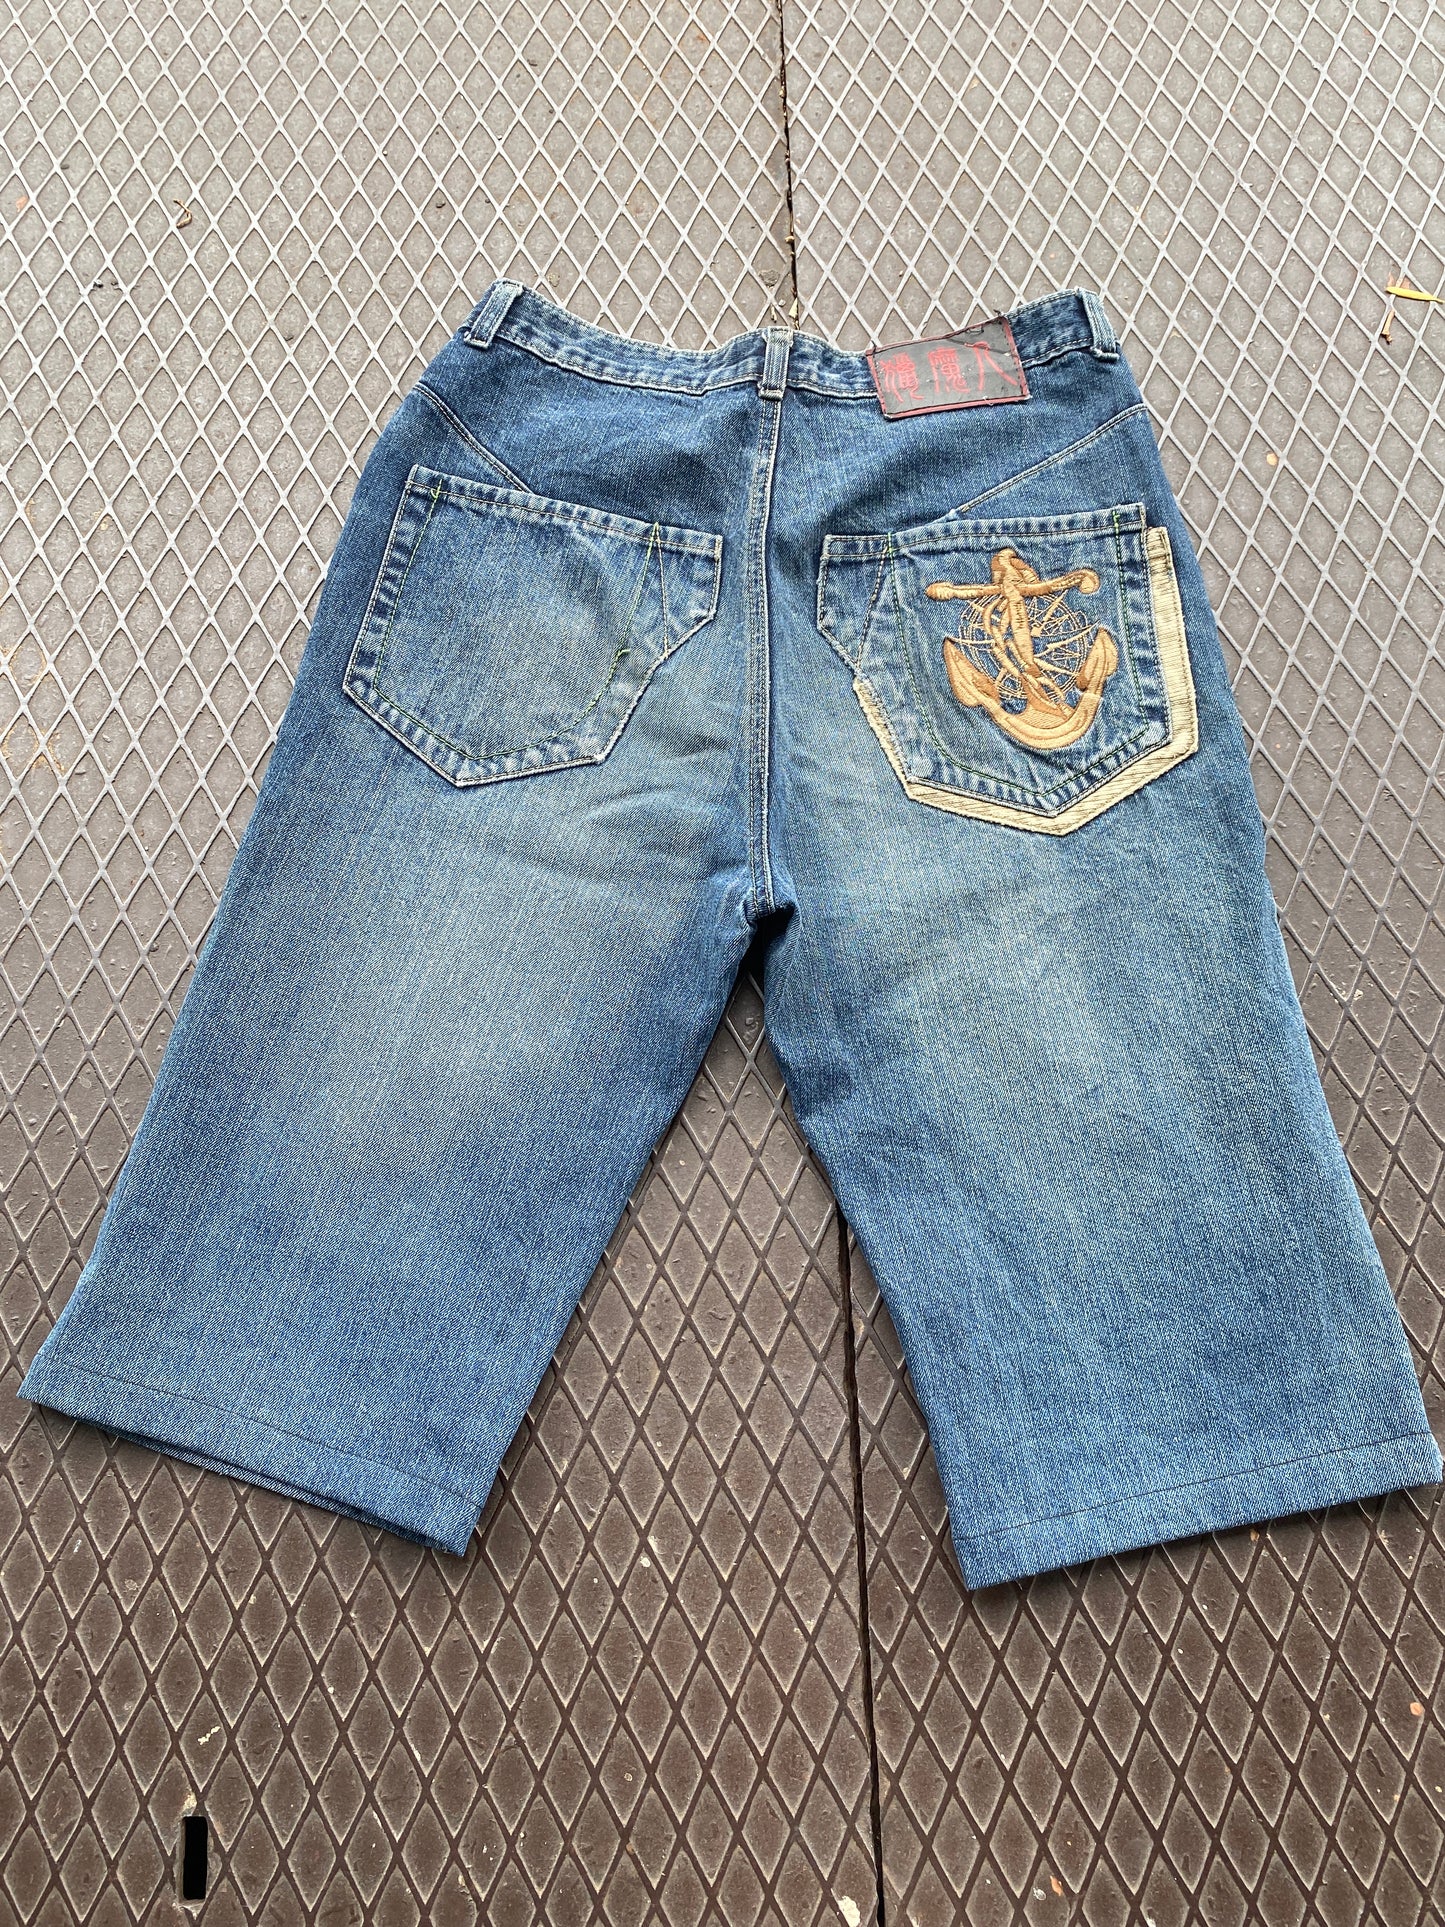 33 - LMR Jeans Denim Shorts Anchor Embroidery